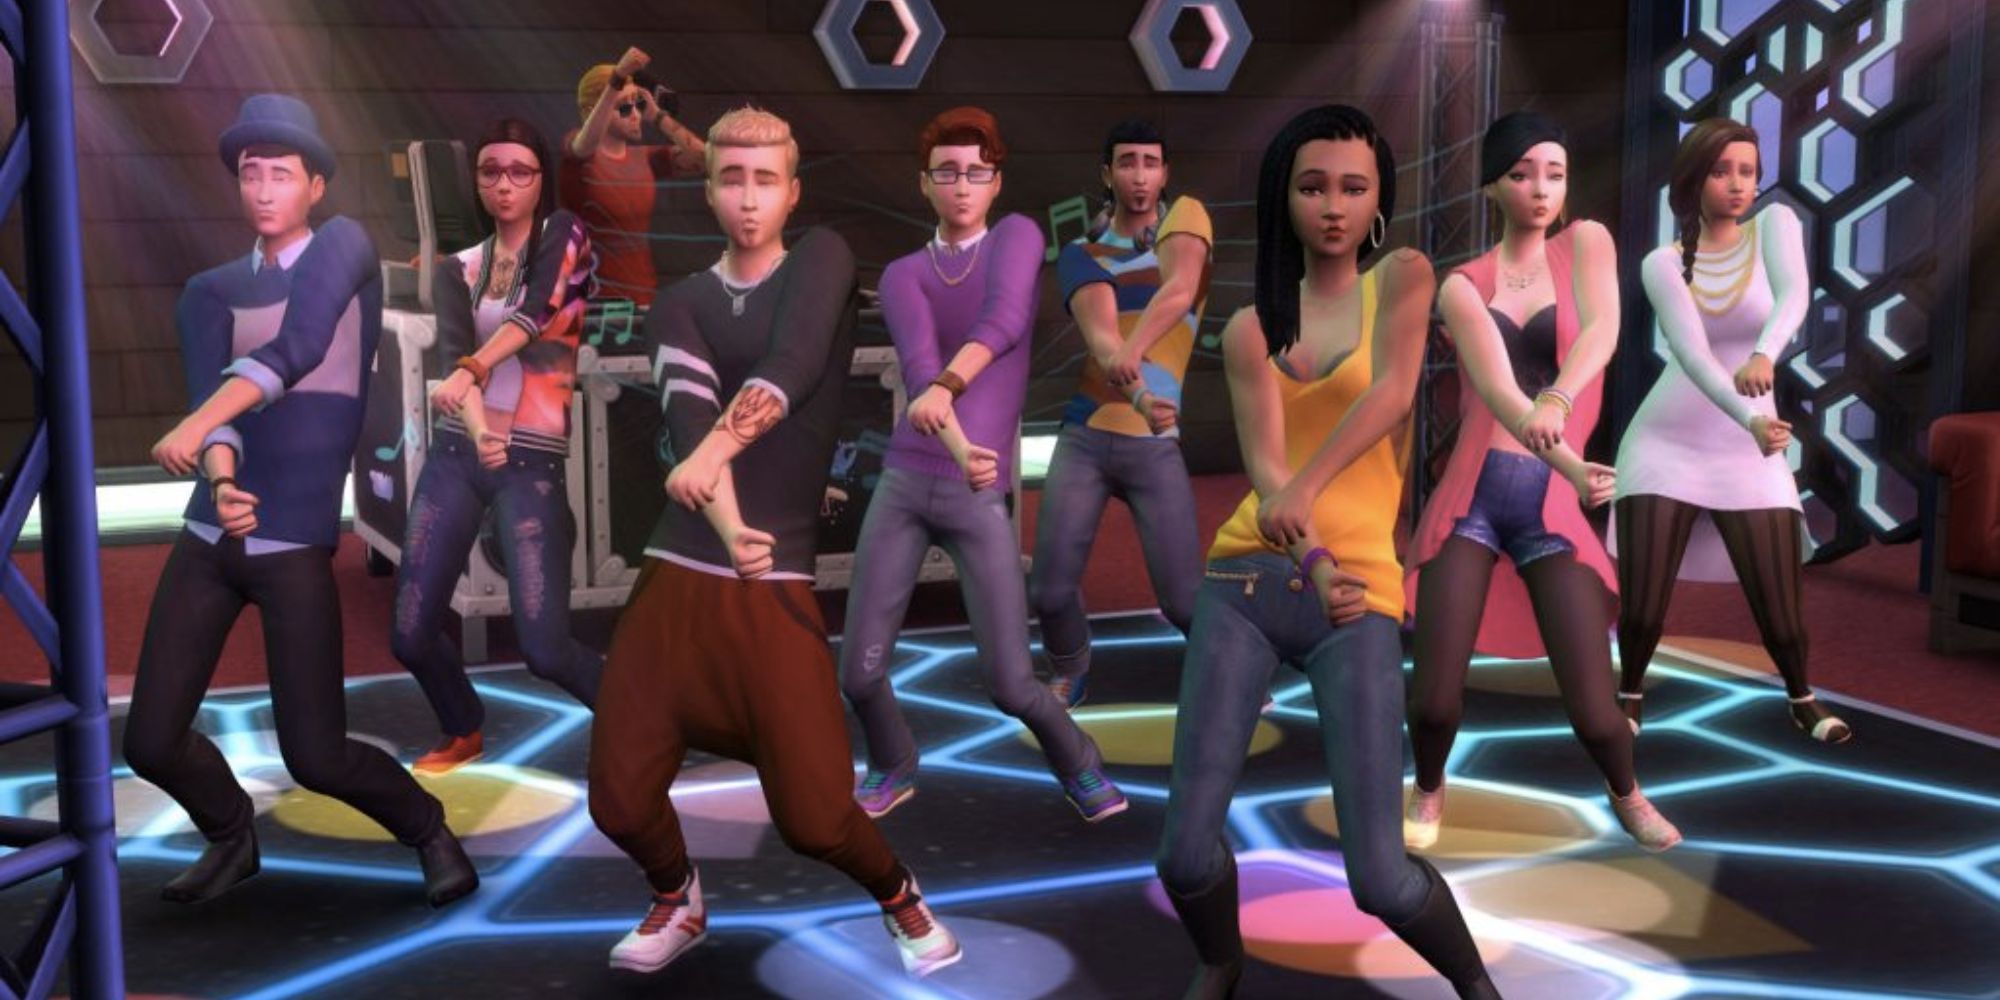 The Sims 4 Dancing Skill and Group Dance